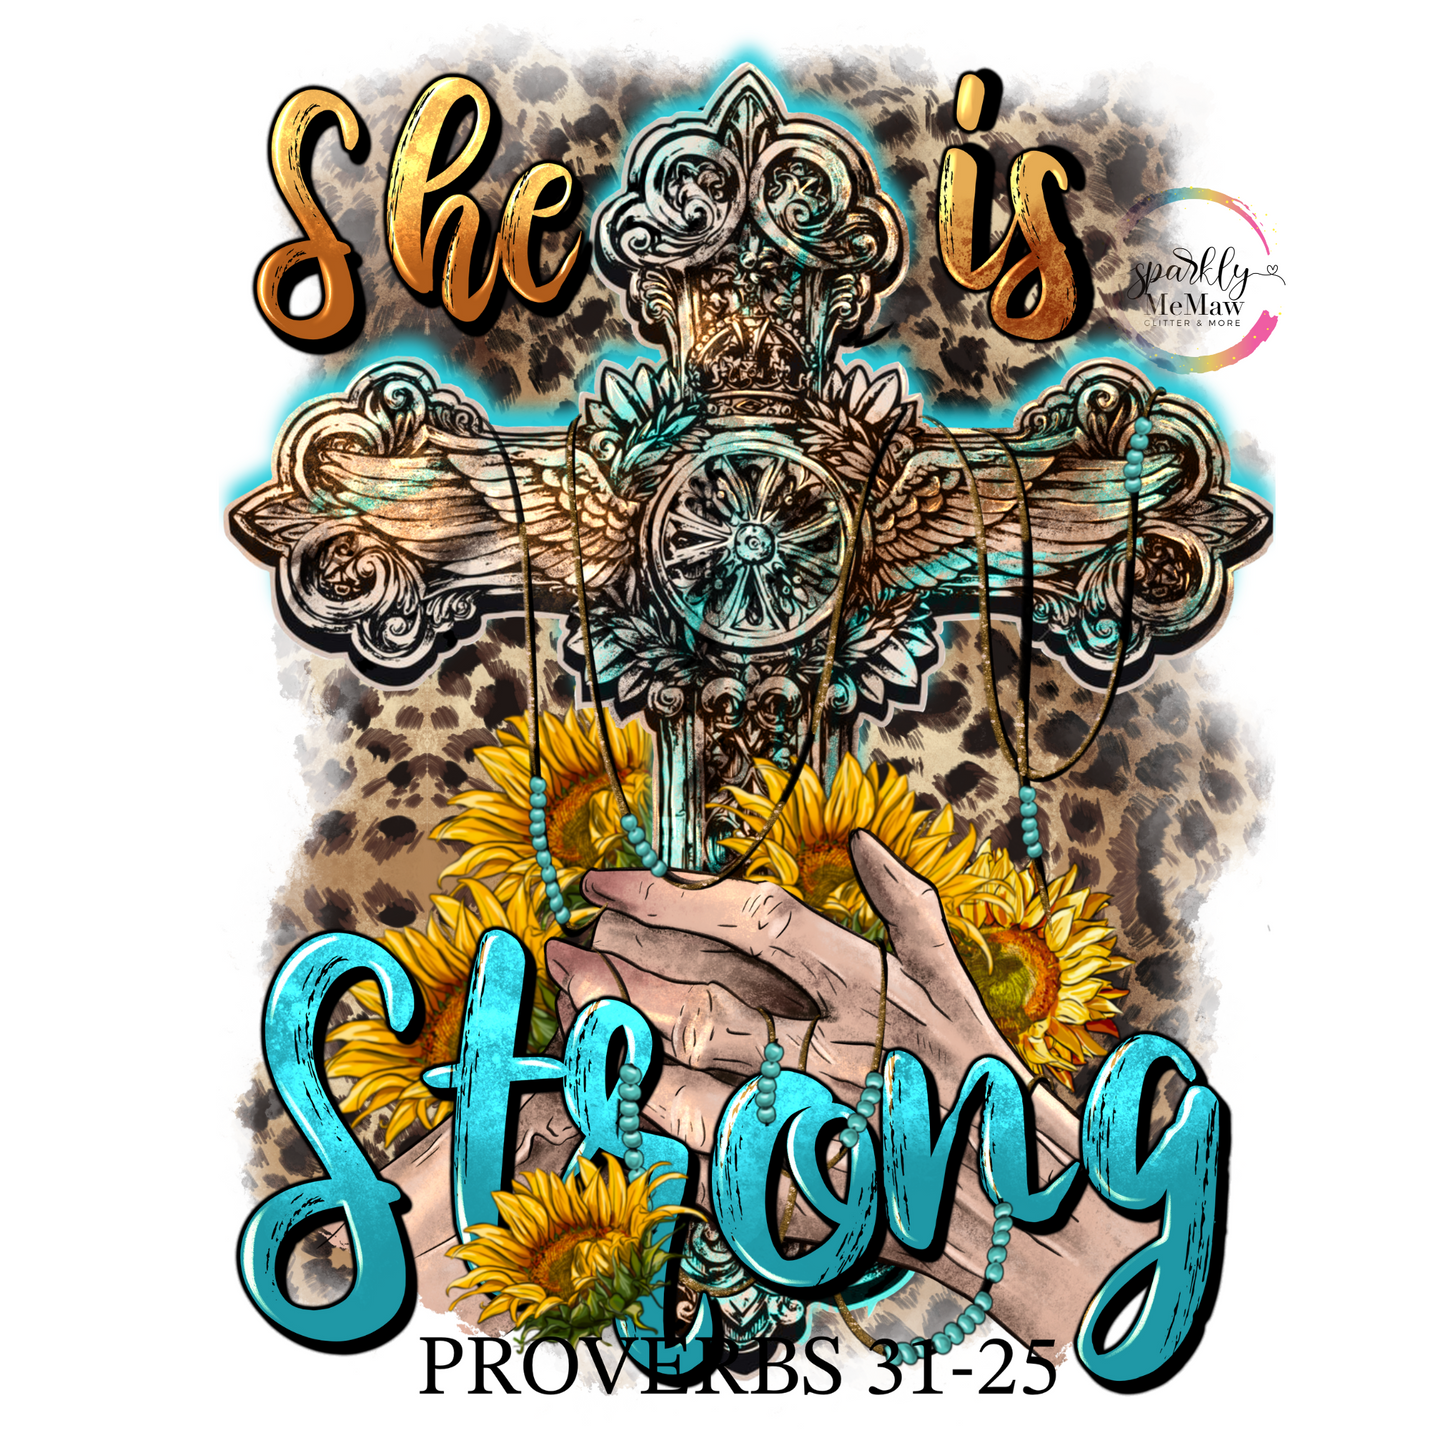 She is Strong UV Decal 4 x 3